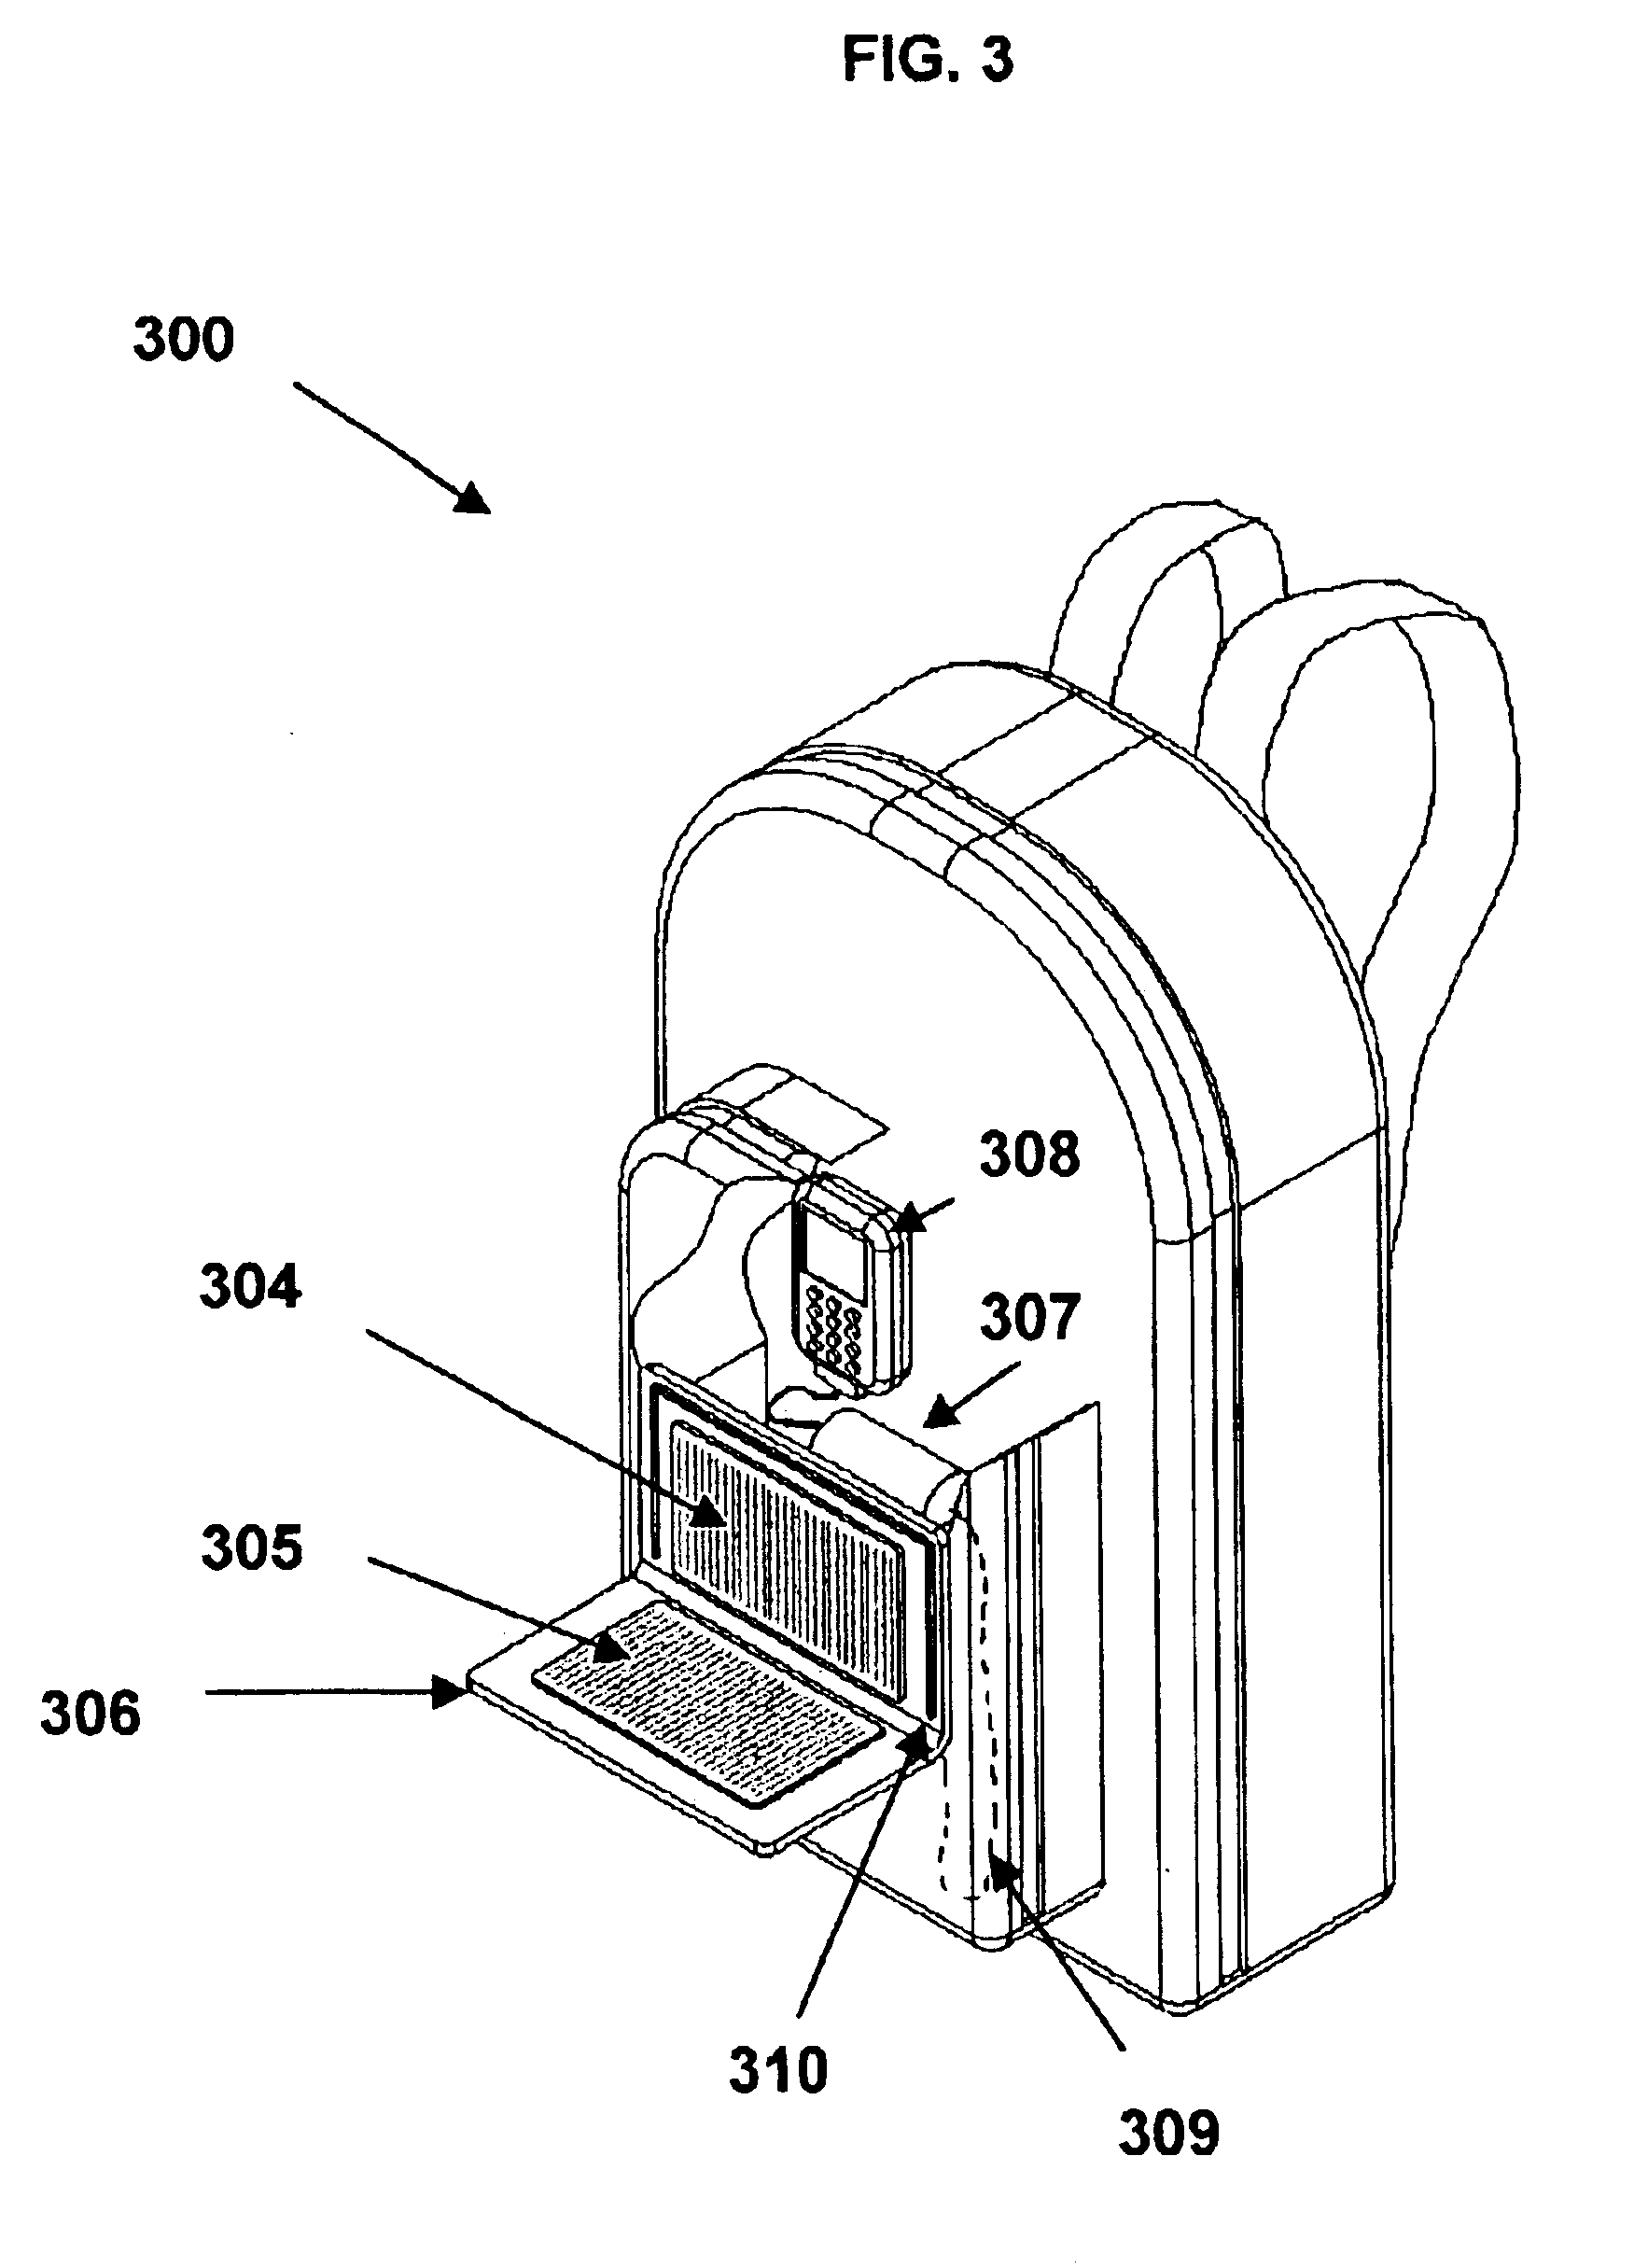 System and apparatus for charging an electronic device using solar energy